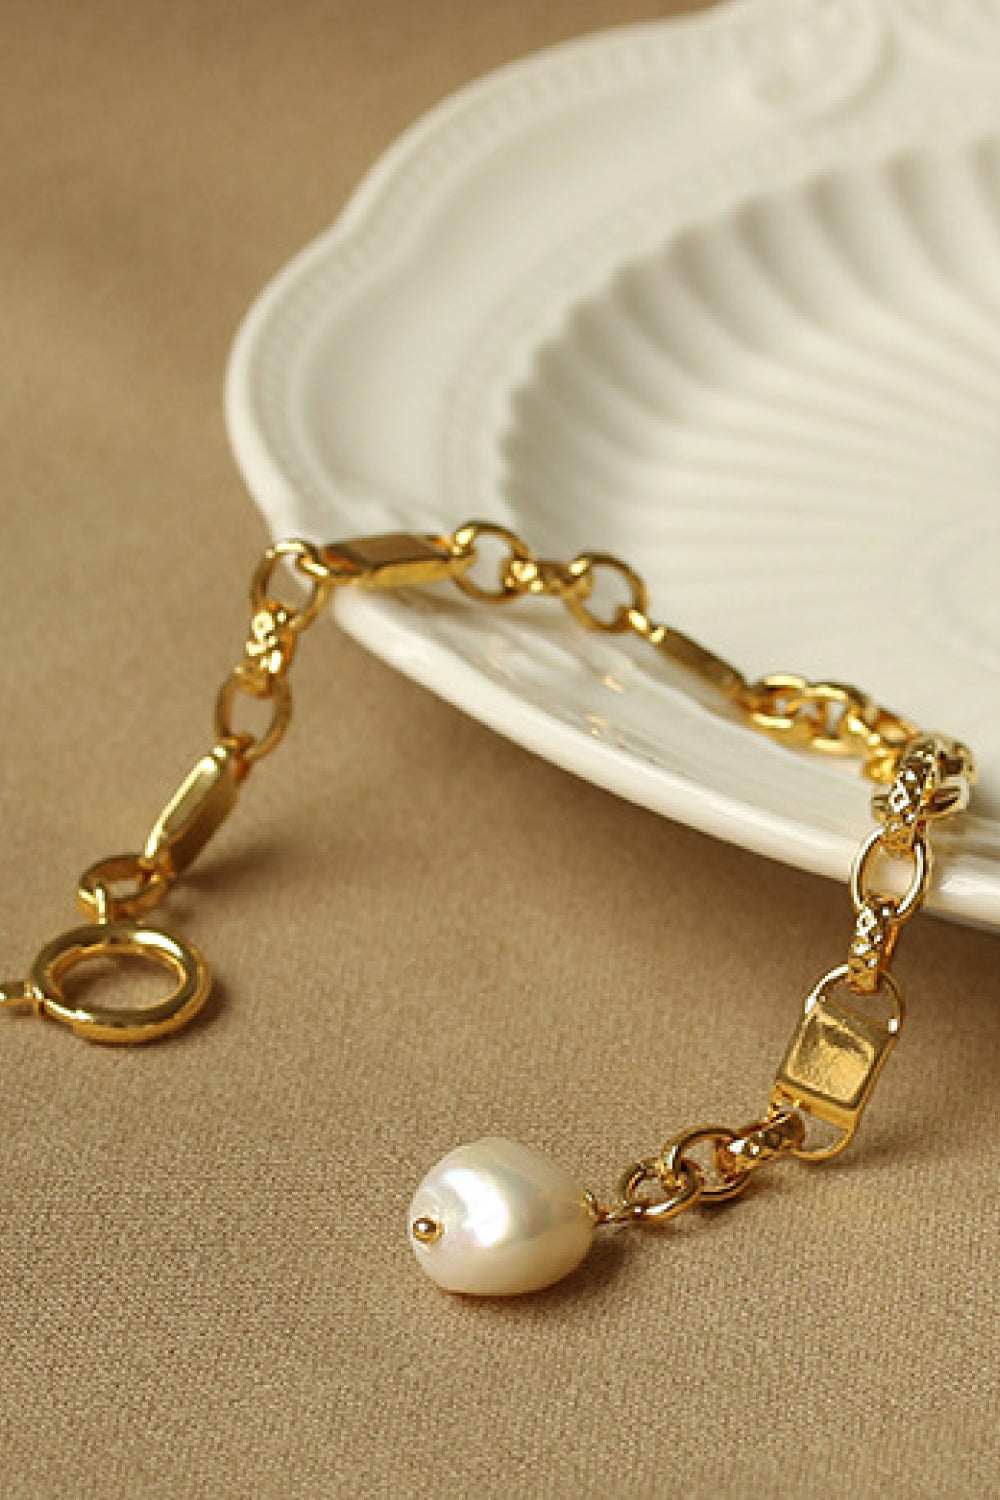 Link Chain Bracelet with Pearl